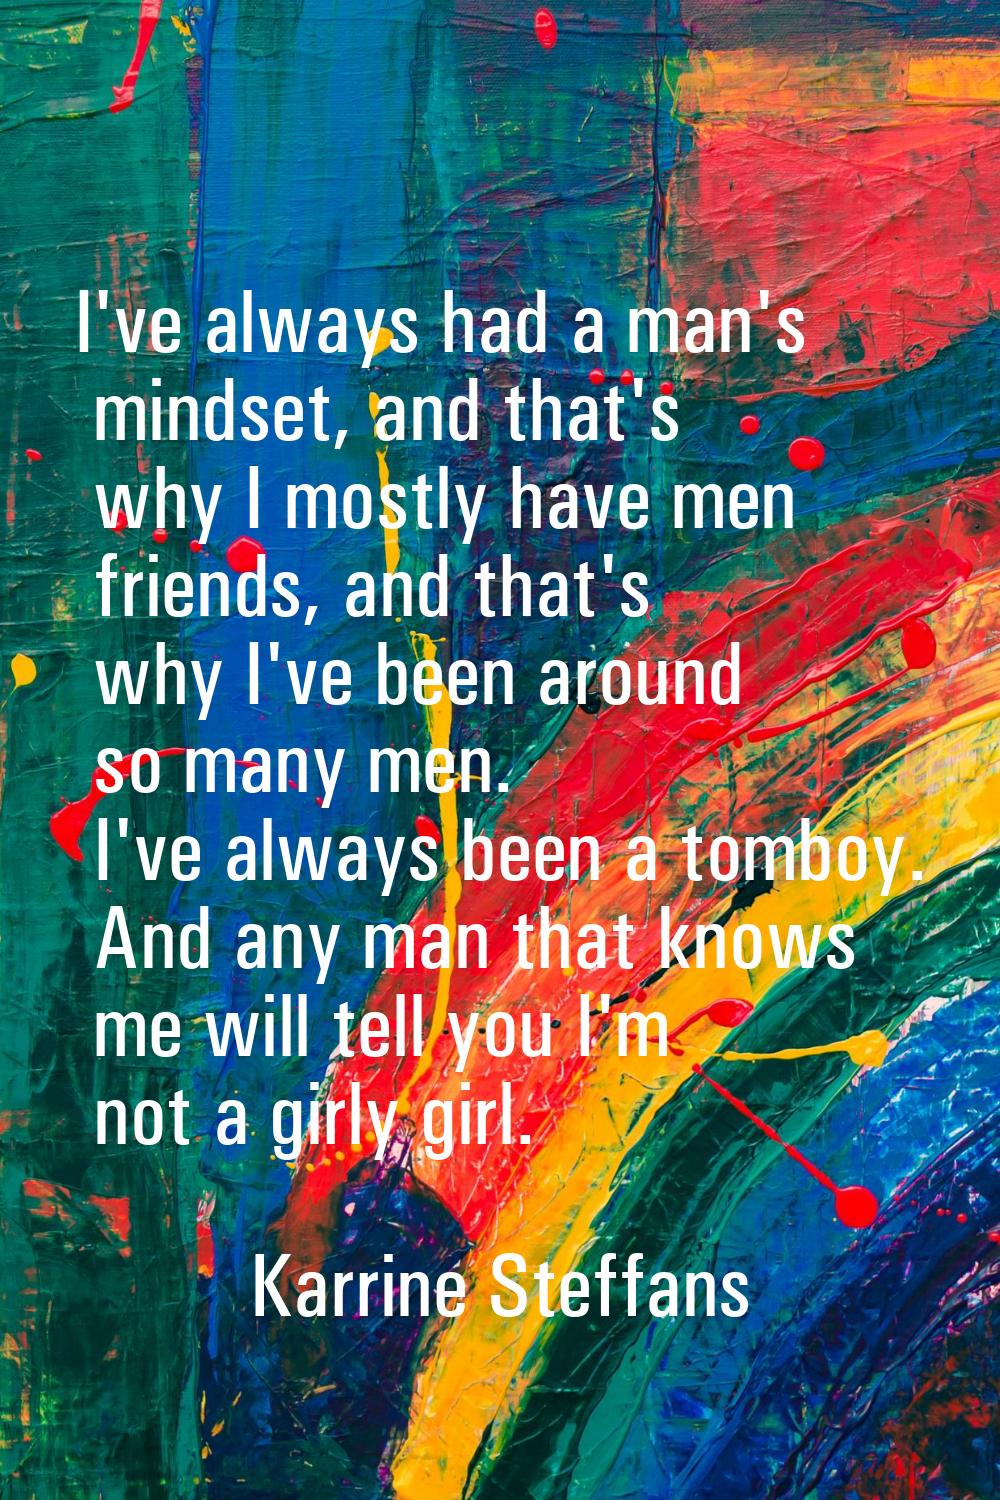 I've always had a man's mindset, and that's why I mostly have men friends, and that's why I've been